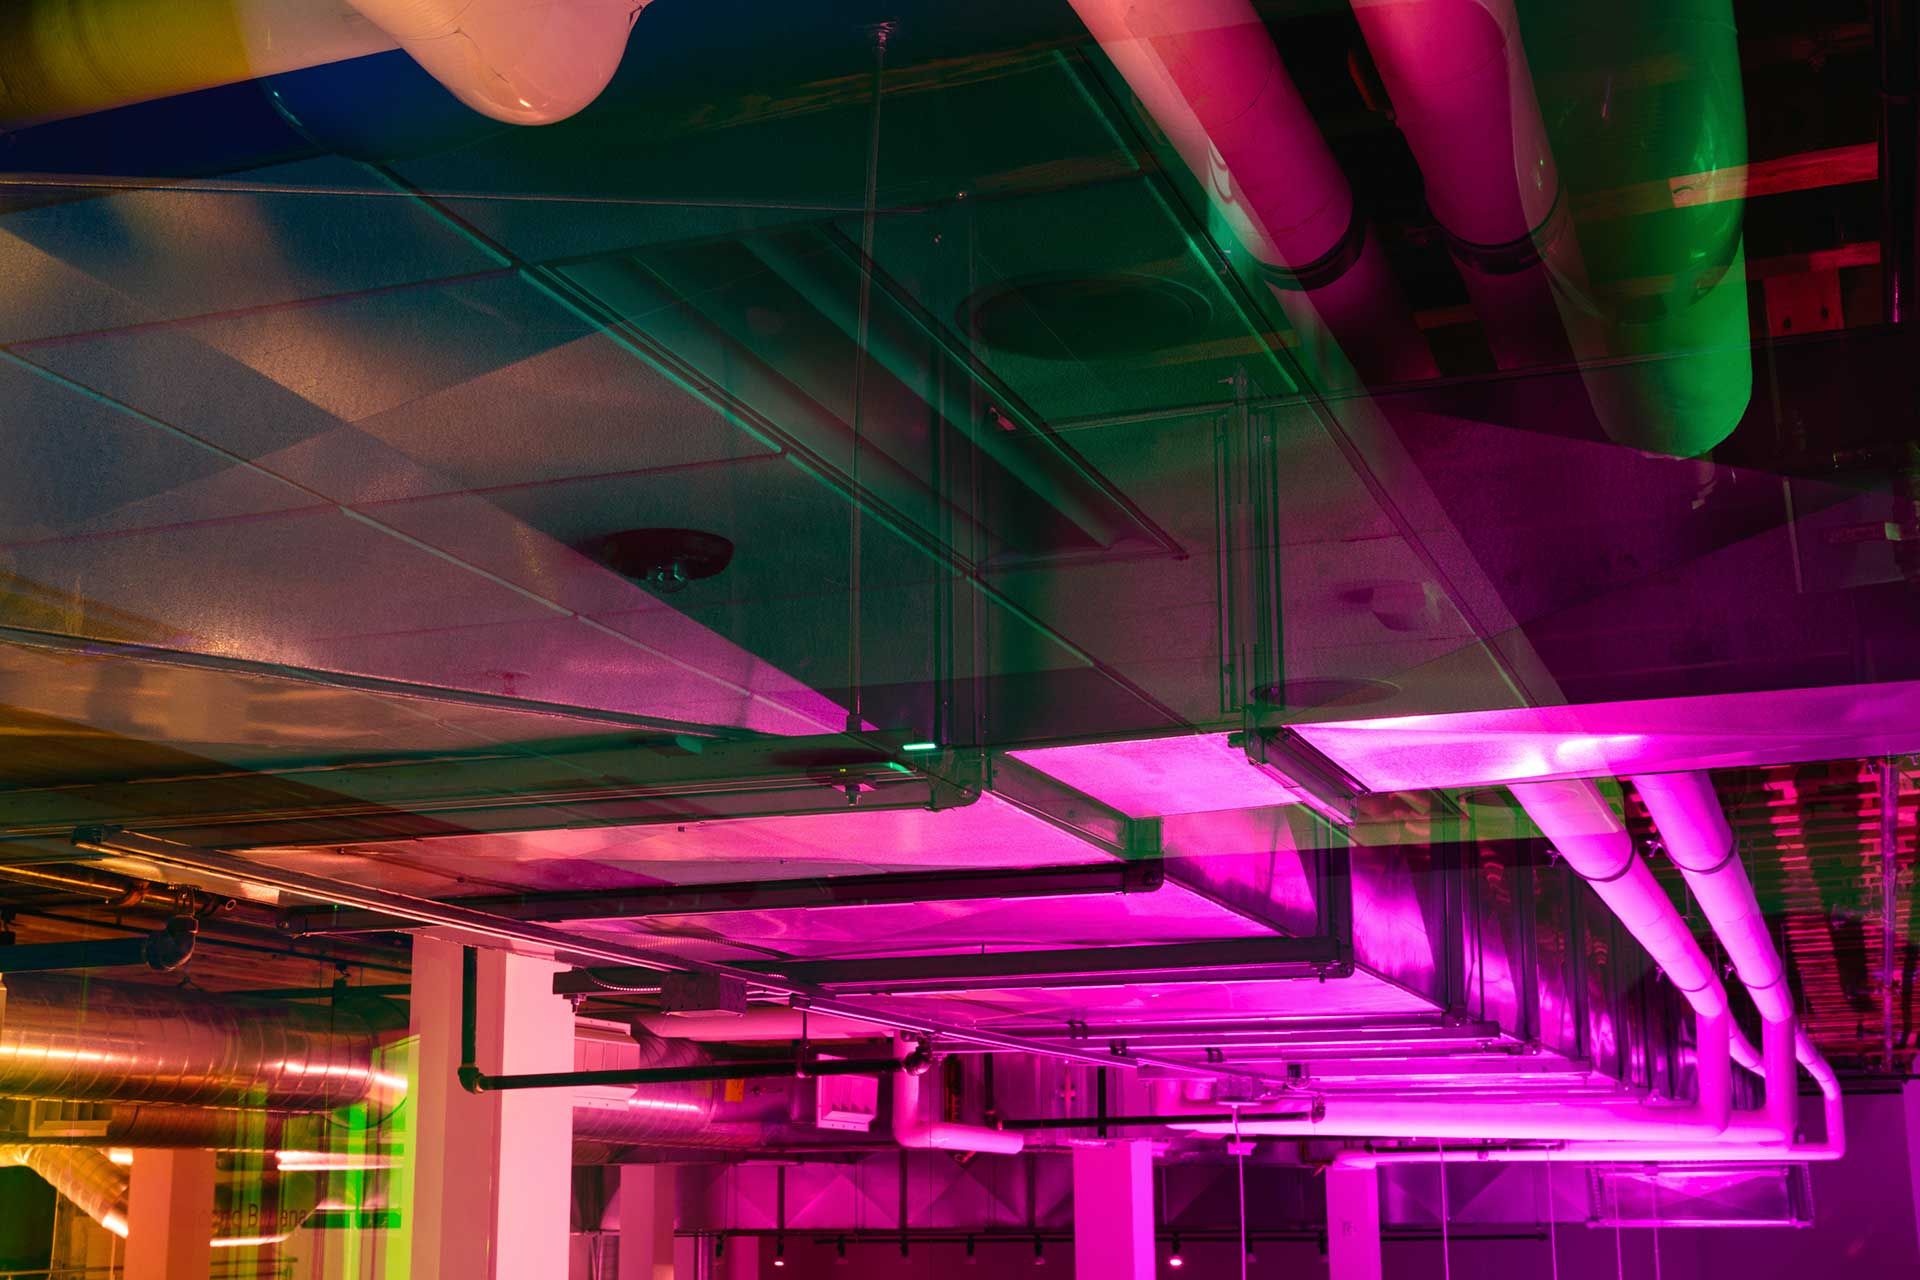 Pink light cast onto the celing showing airconditioning ducts